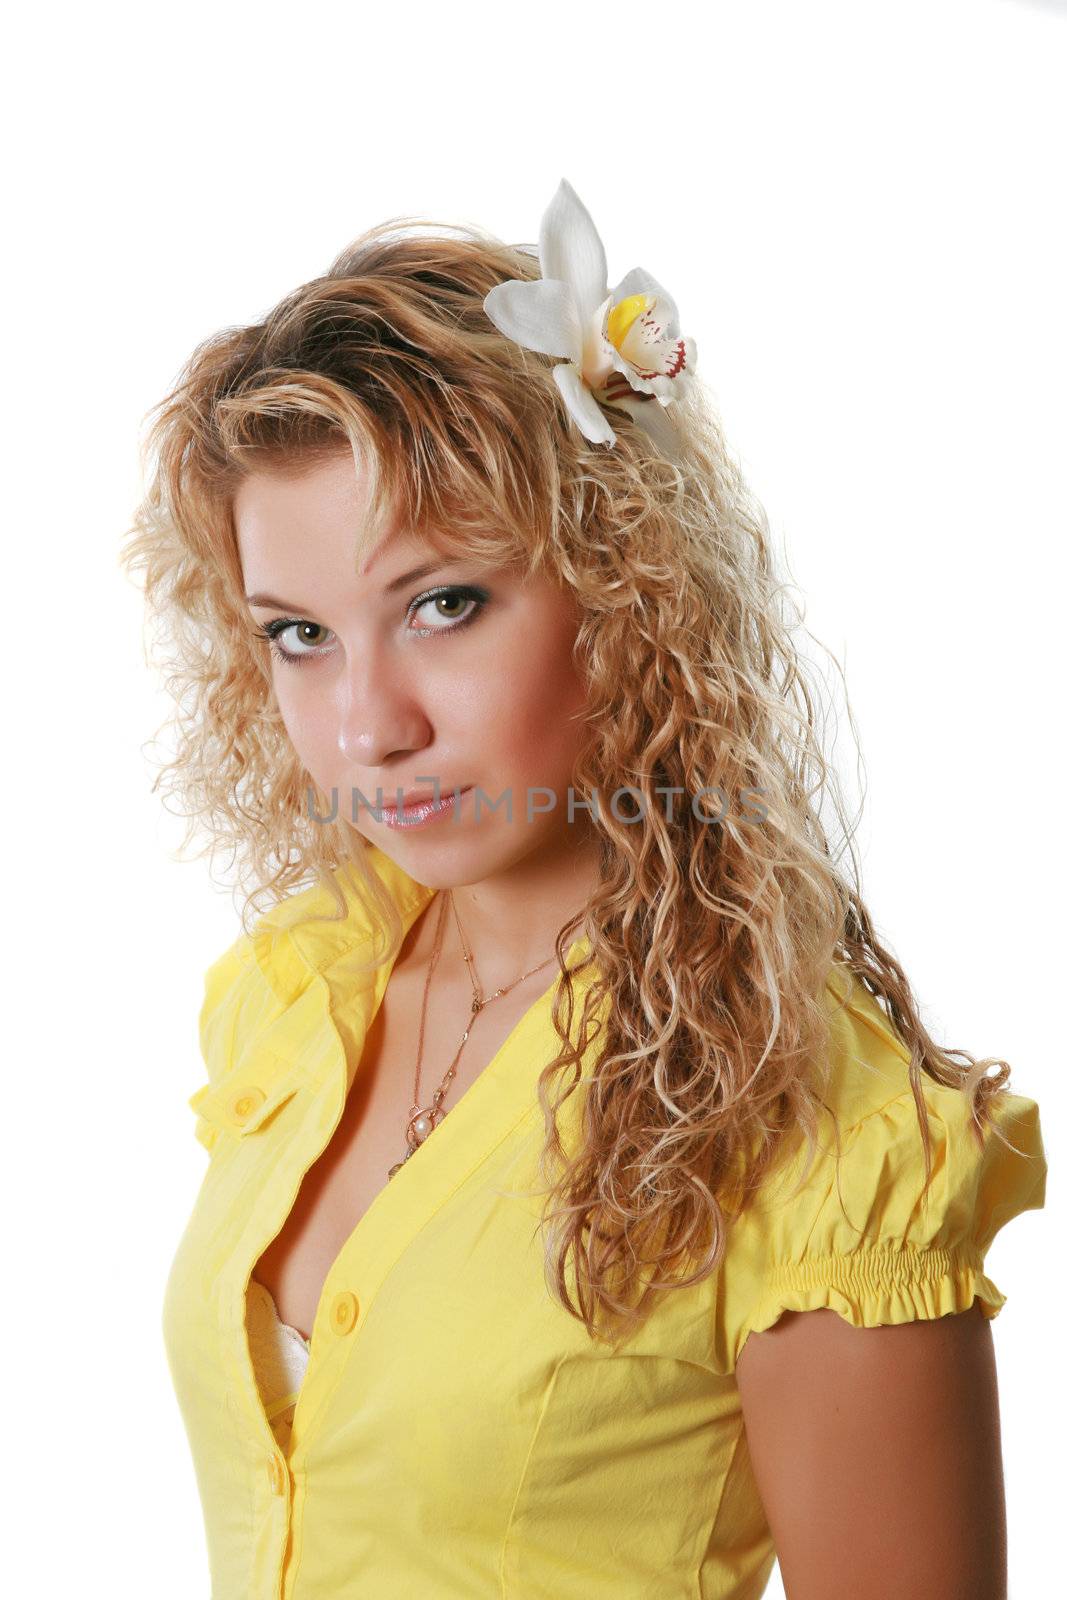  The girl in yellow clothes with a flower in hair